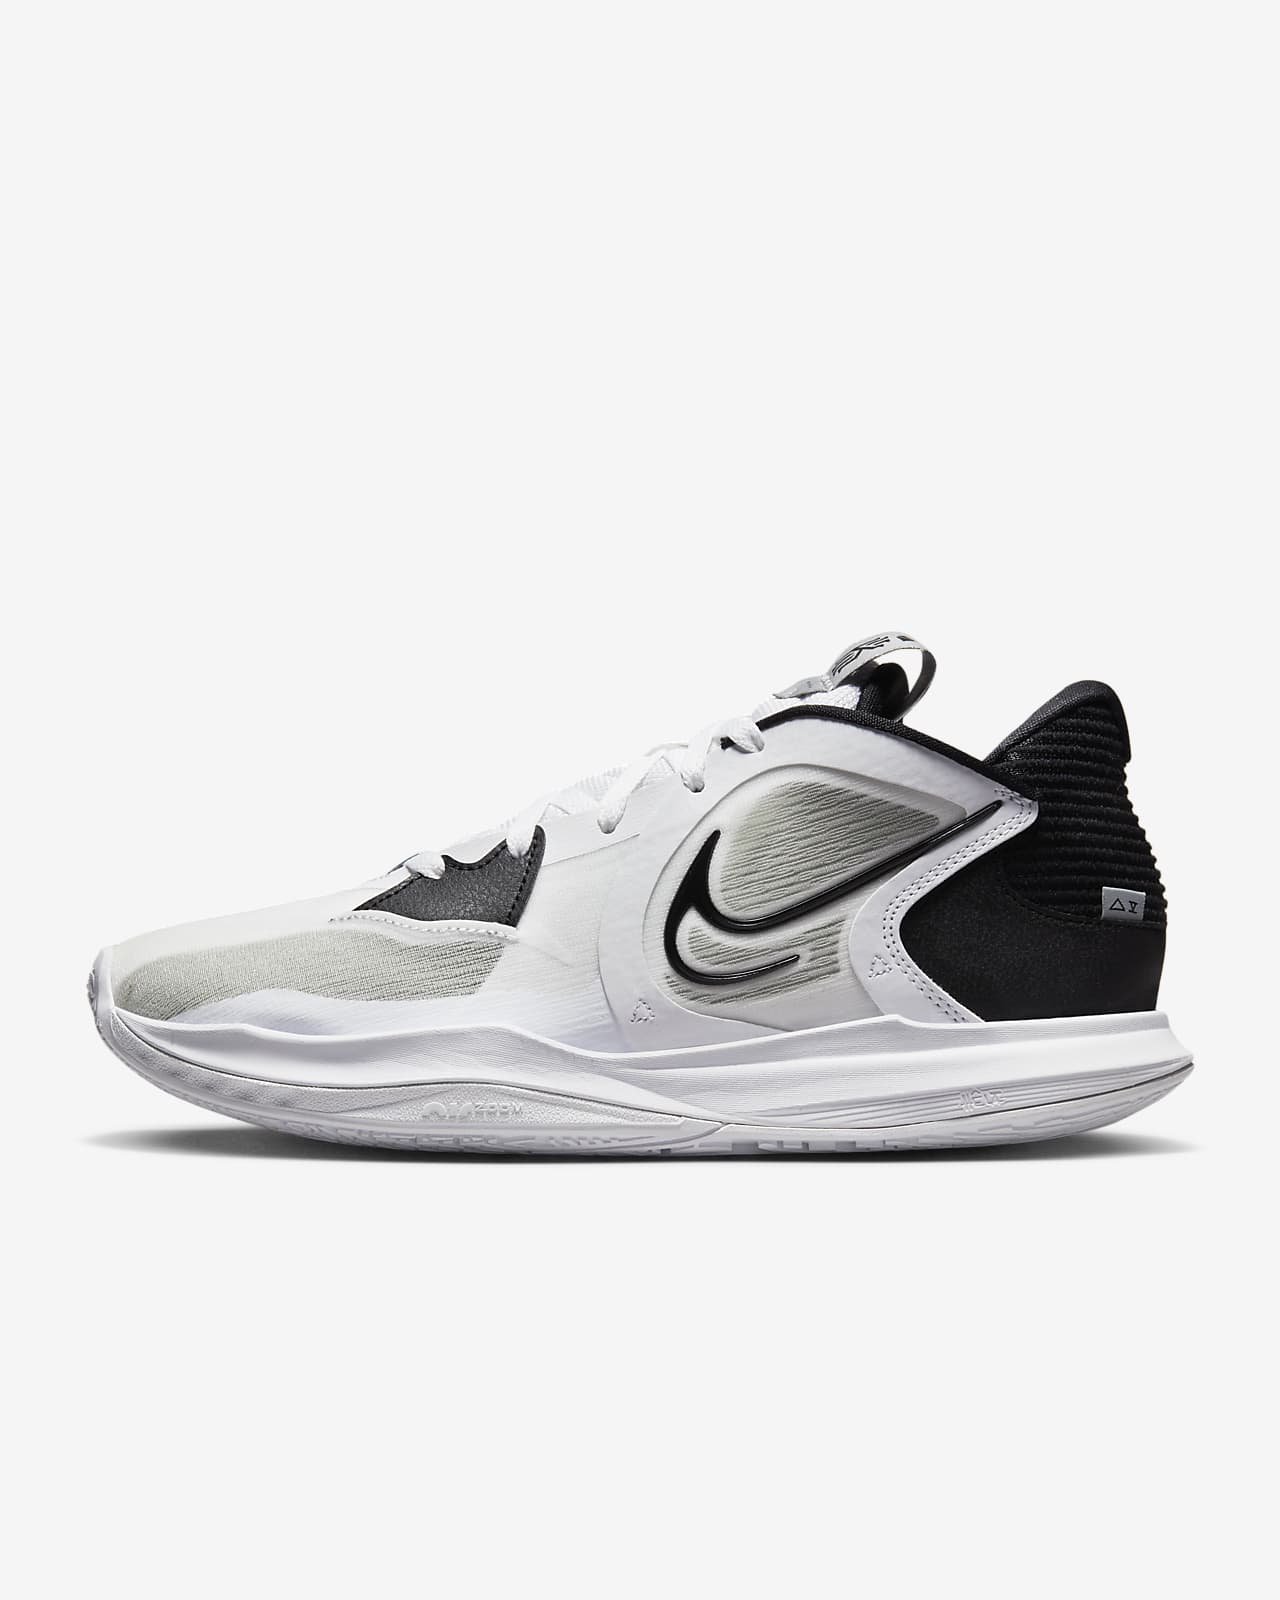 Kyrie Low 5 Basketball Shoes. Nike BE